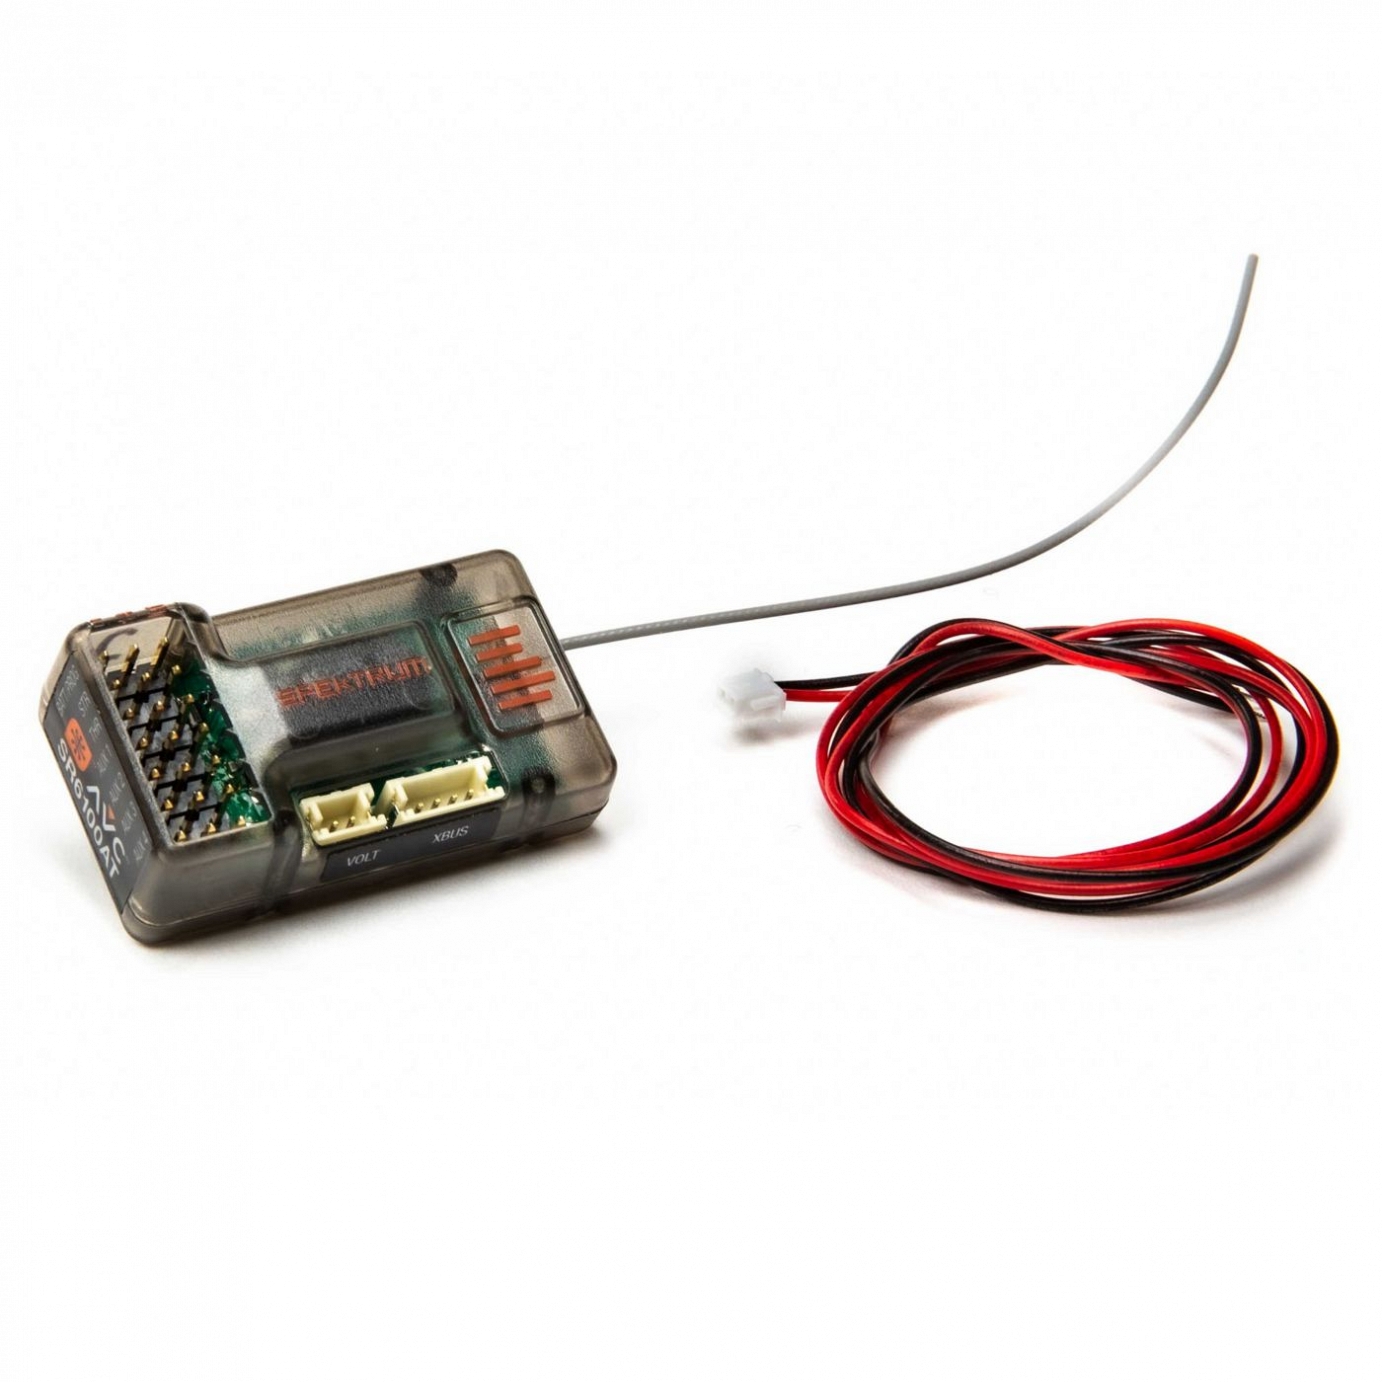 Spektrum SR6100AT 6ch Surface Receiver with AVC and Telemetry